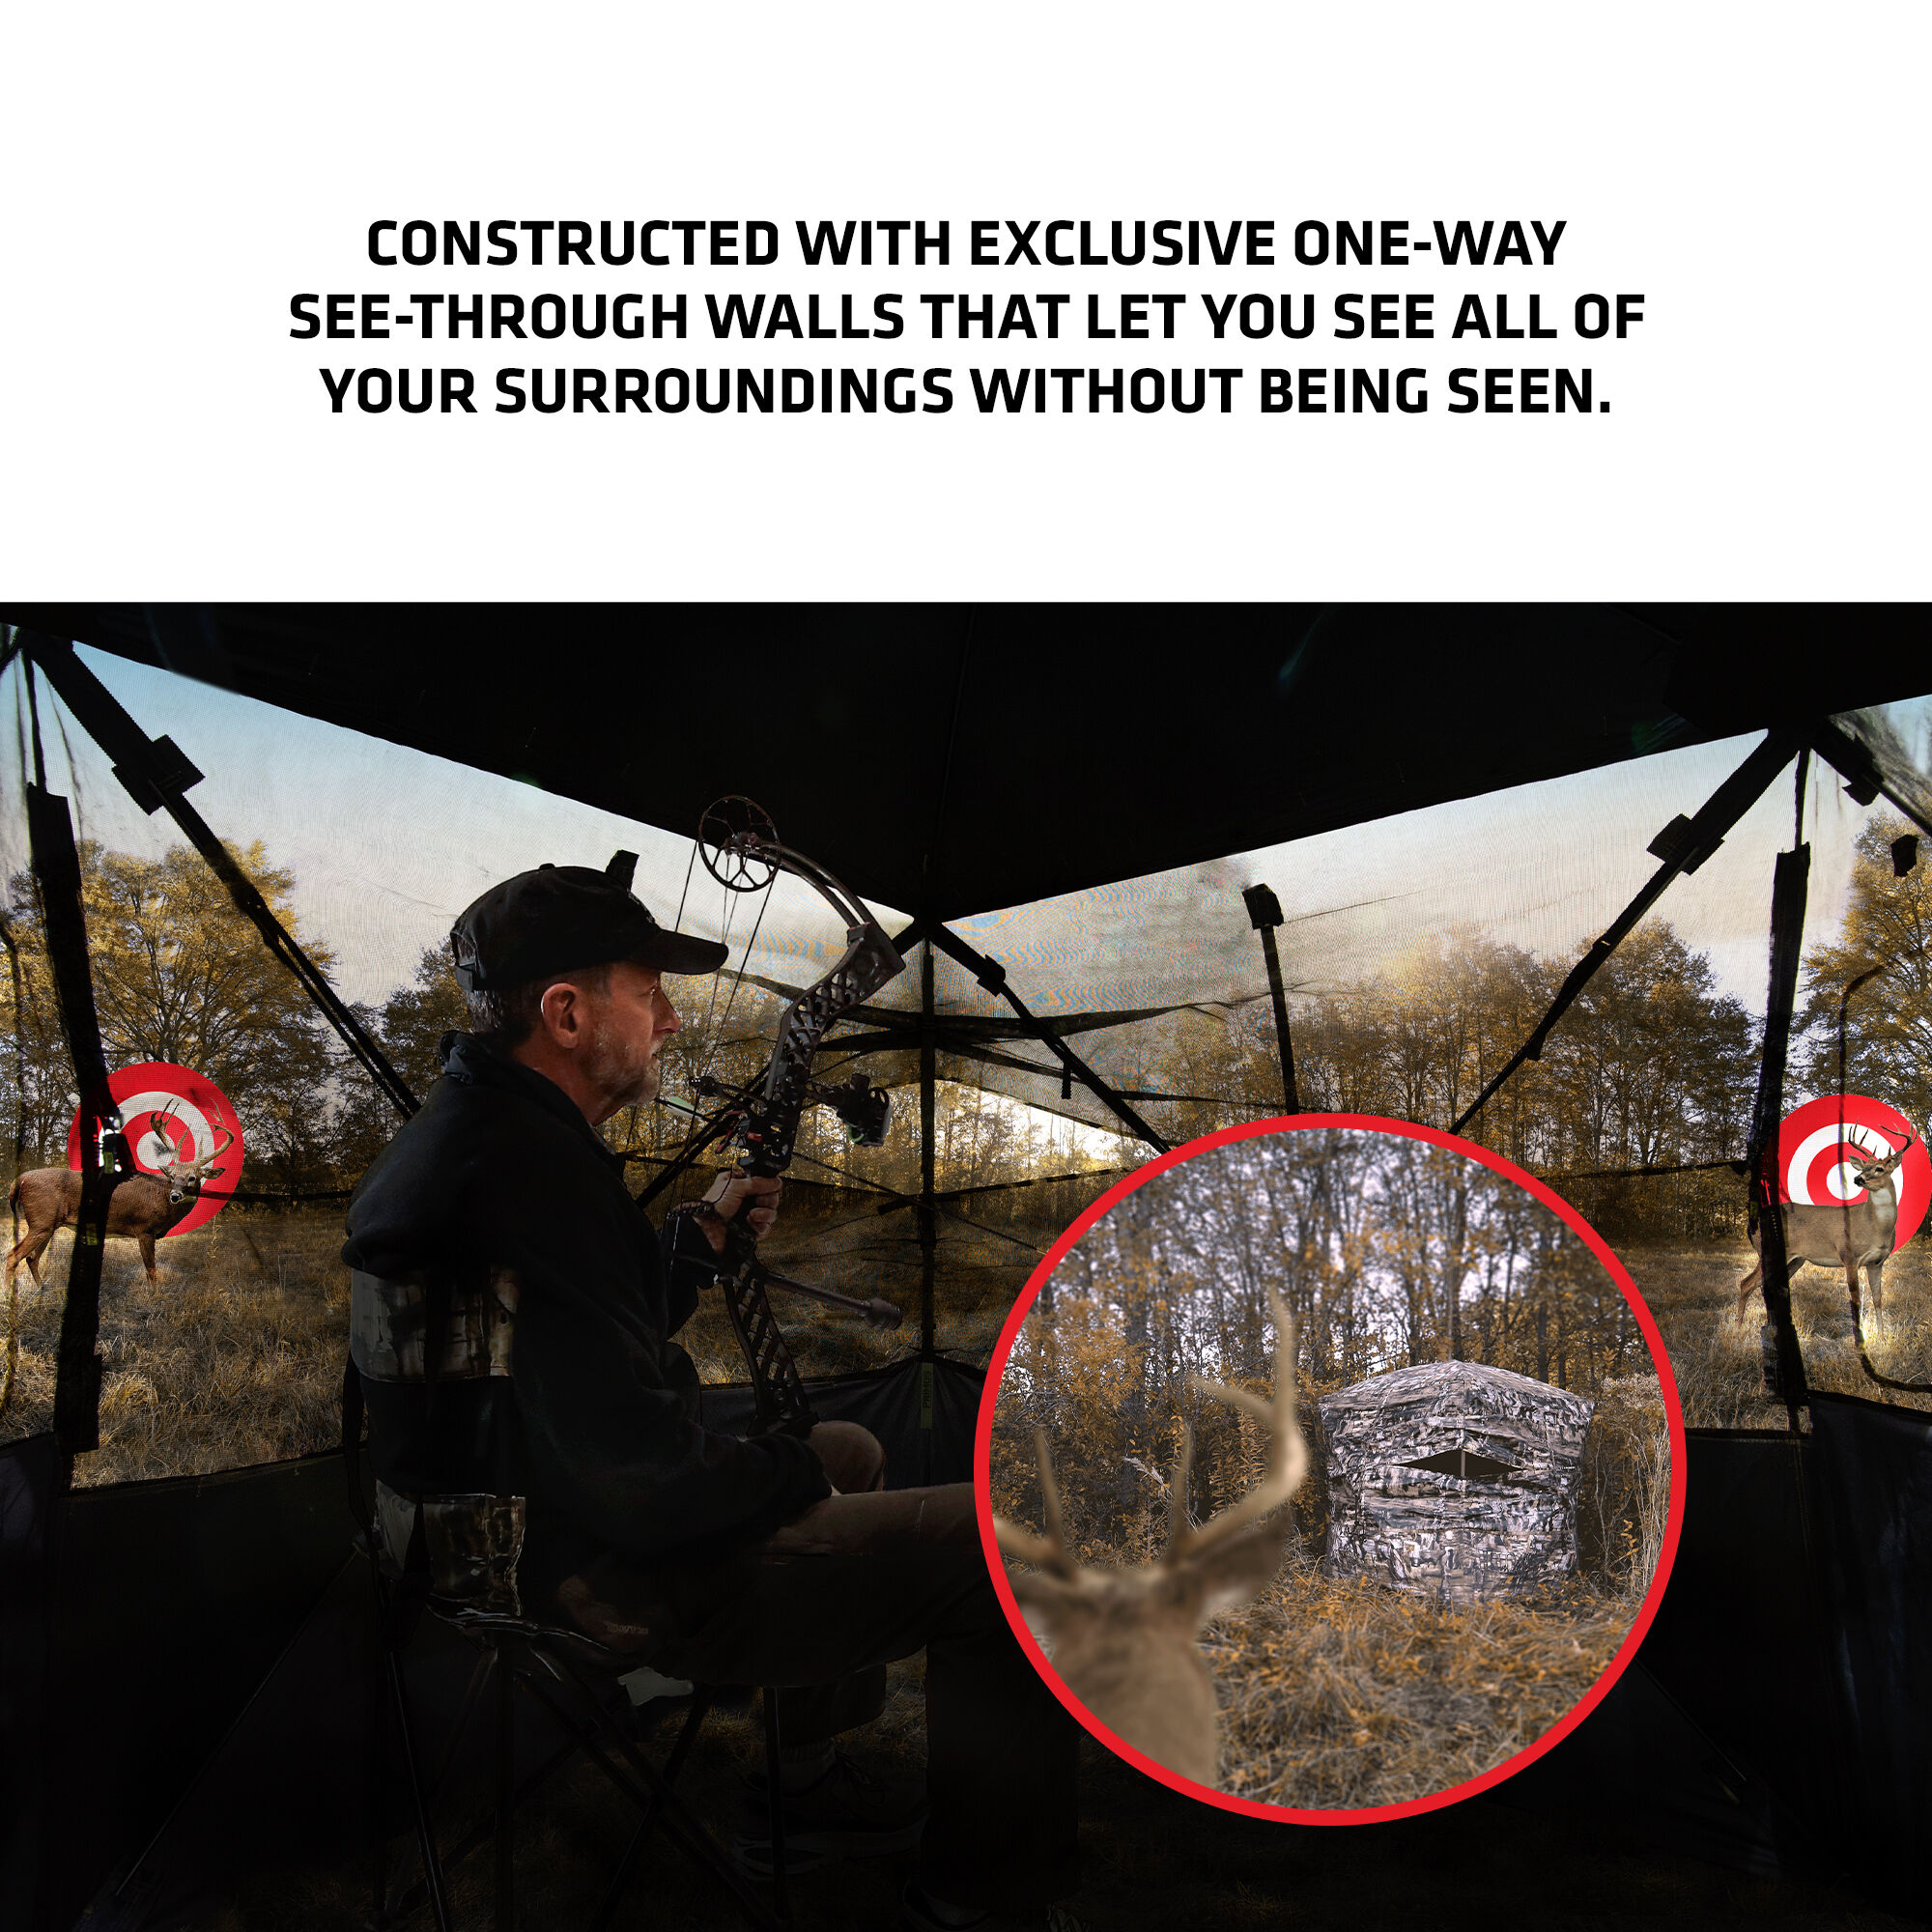 Details about   Primos Double Bull Surround View Blind 360 